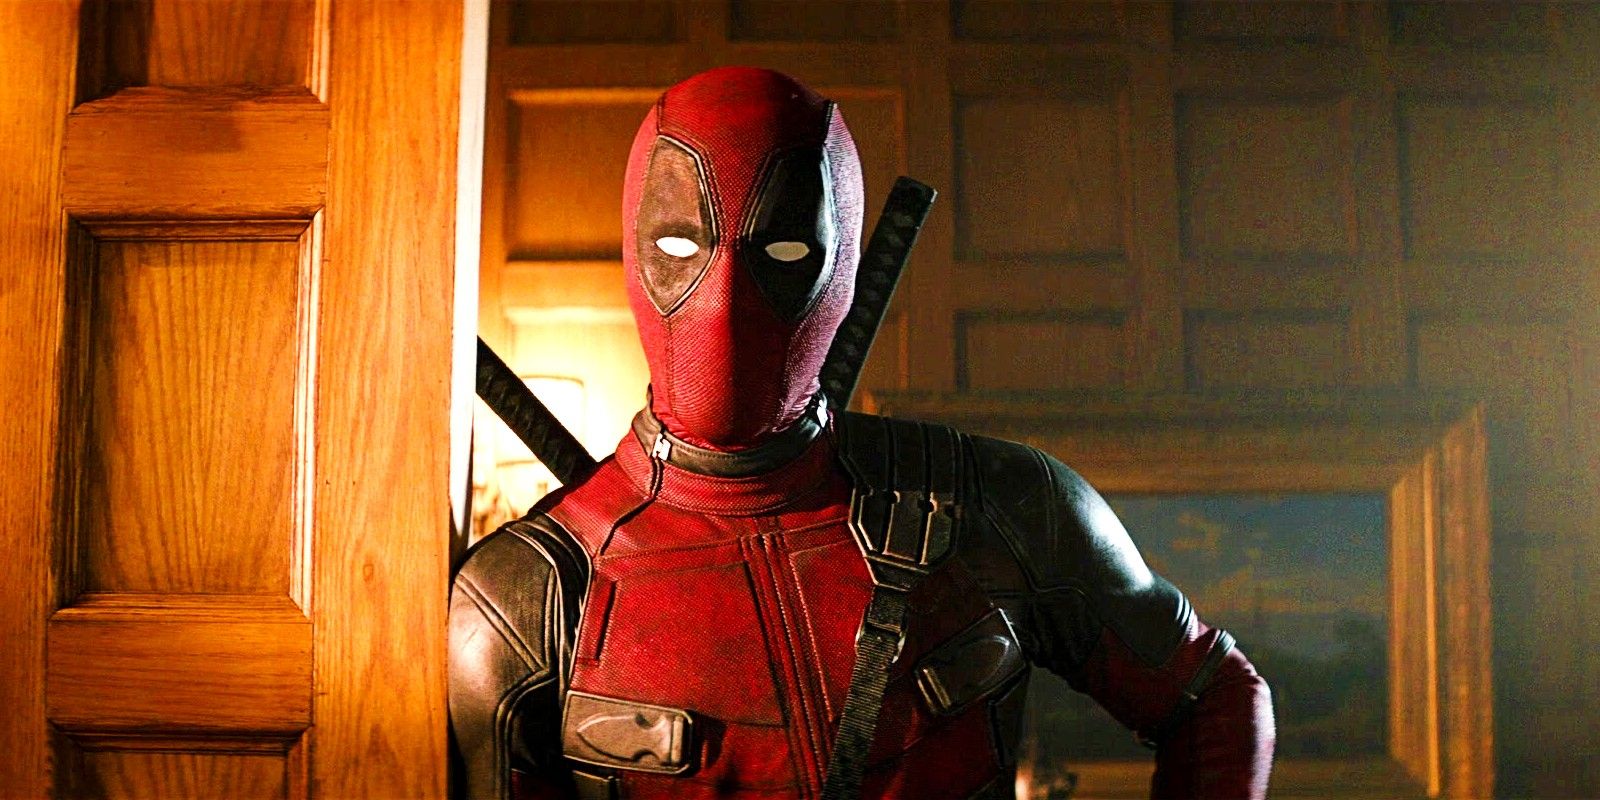 Deadpools New Mcu Costume Revealed In Set Photos First Look At Ryan Reynolds In Deadpool 3